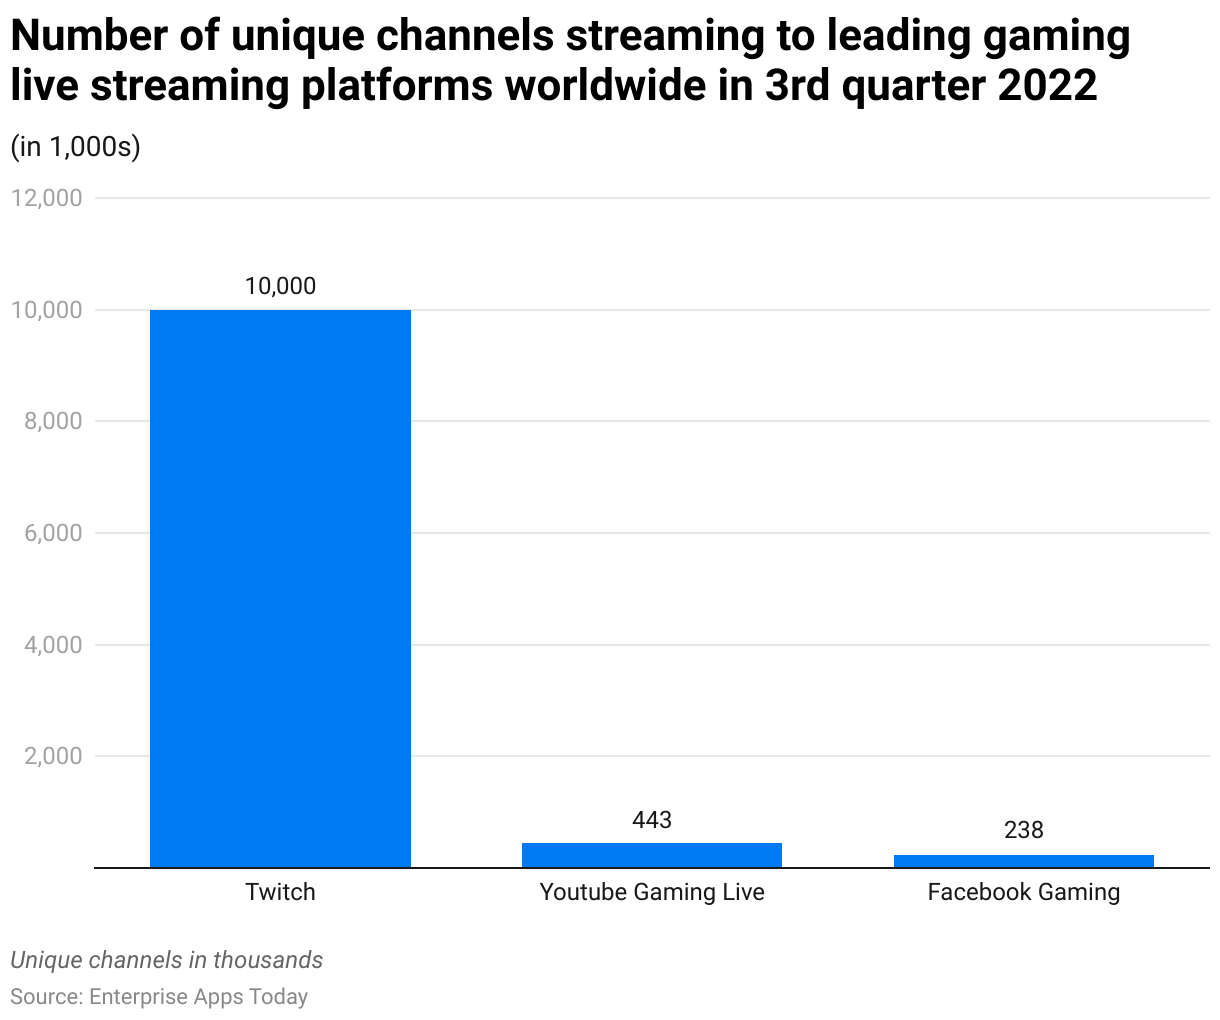 Number of unique channels streaming to leading gaming live streaming platforms worldwide in 3rd quarter 2022